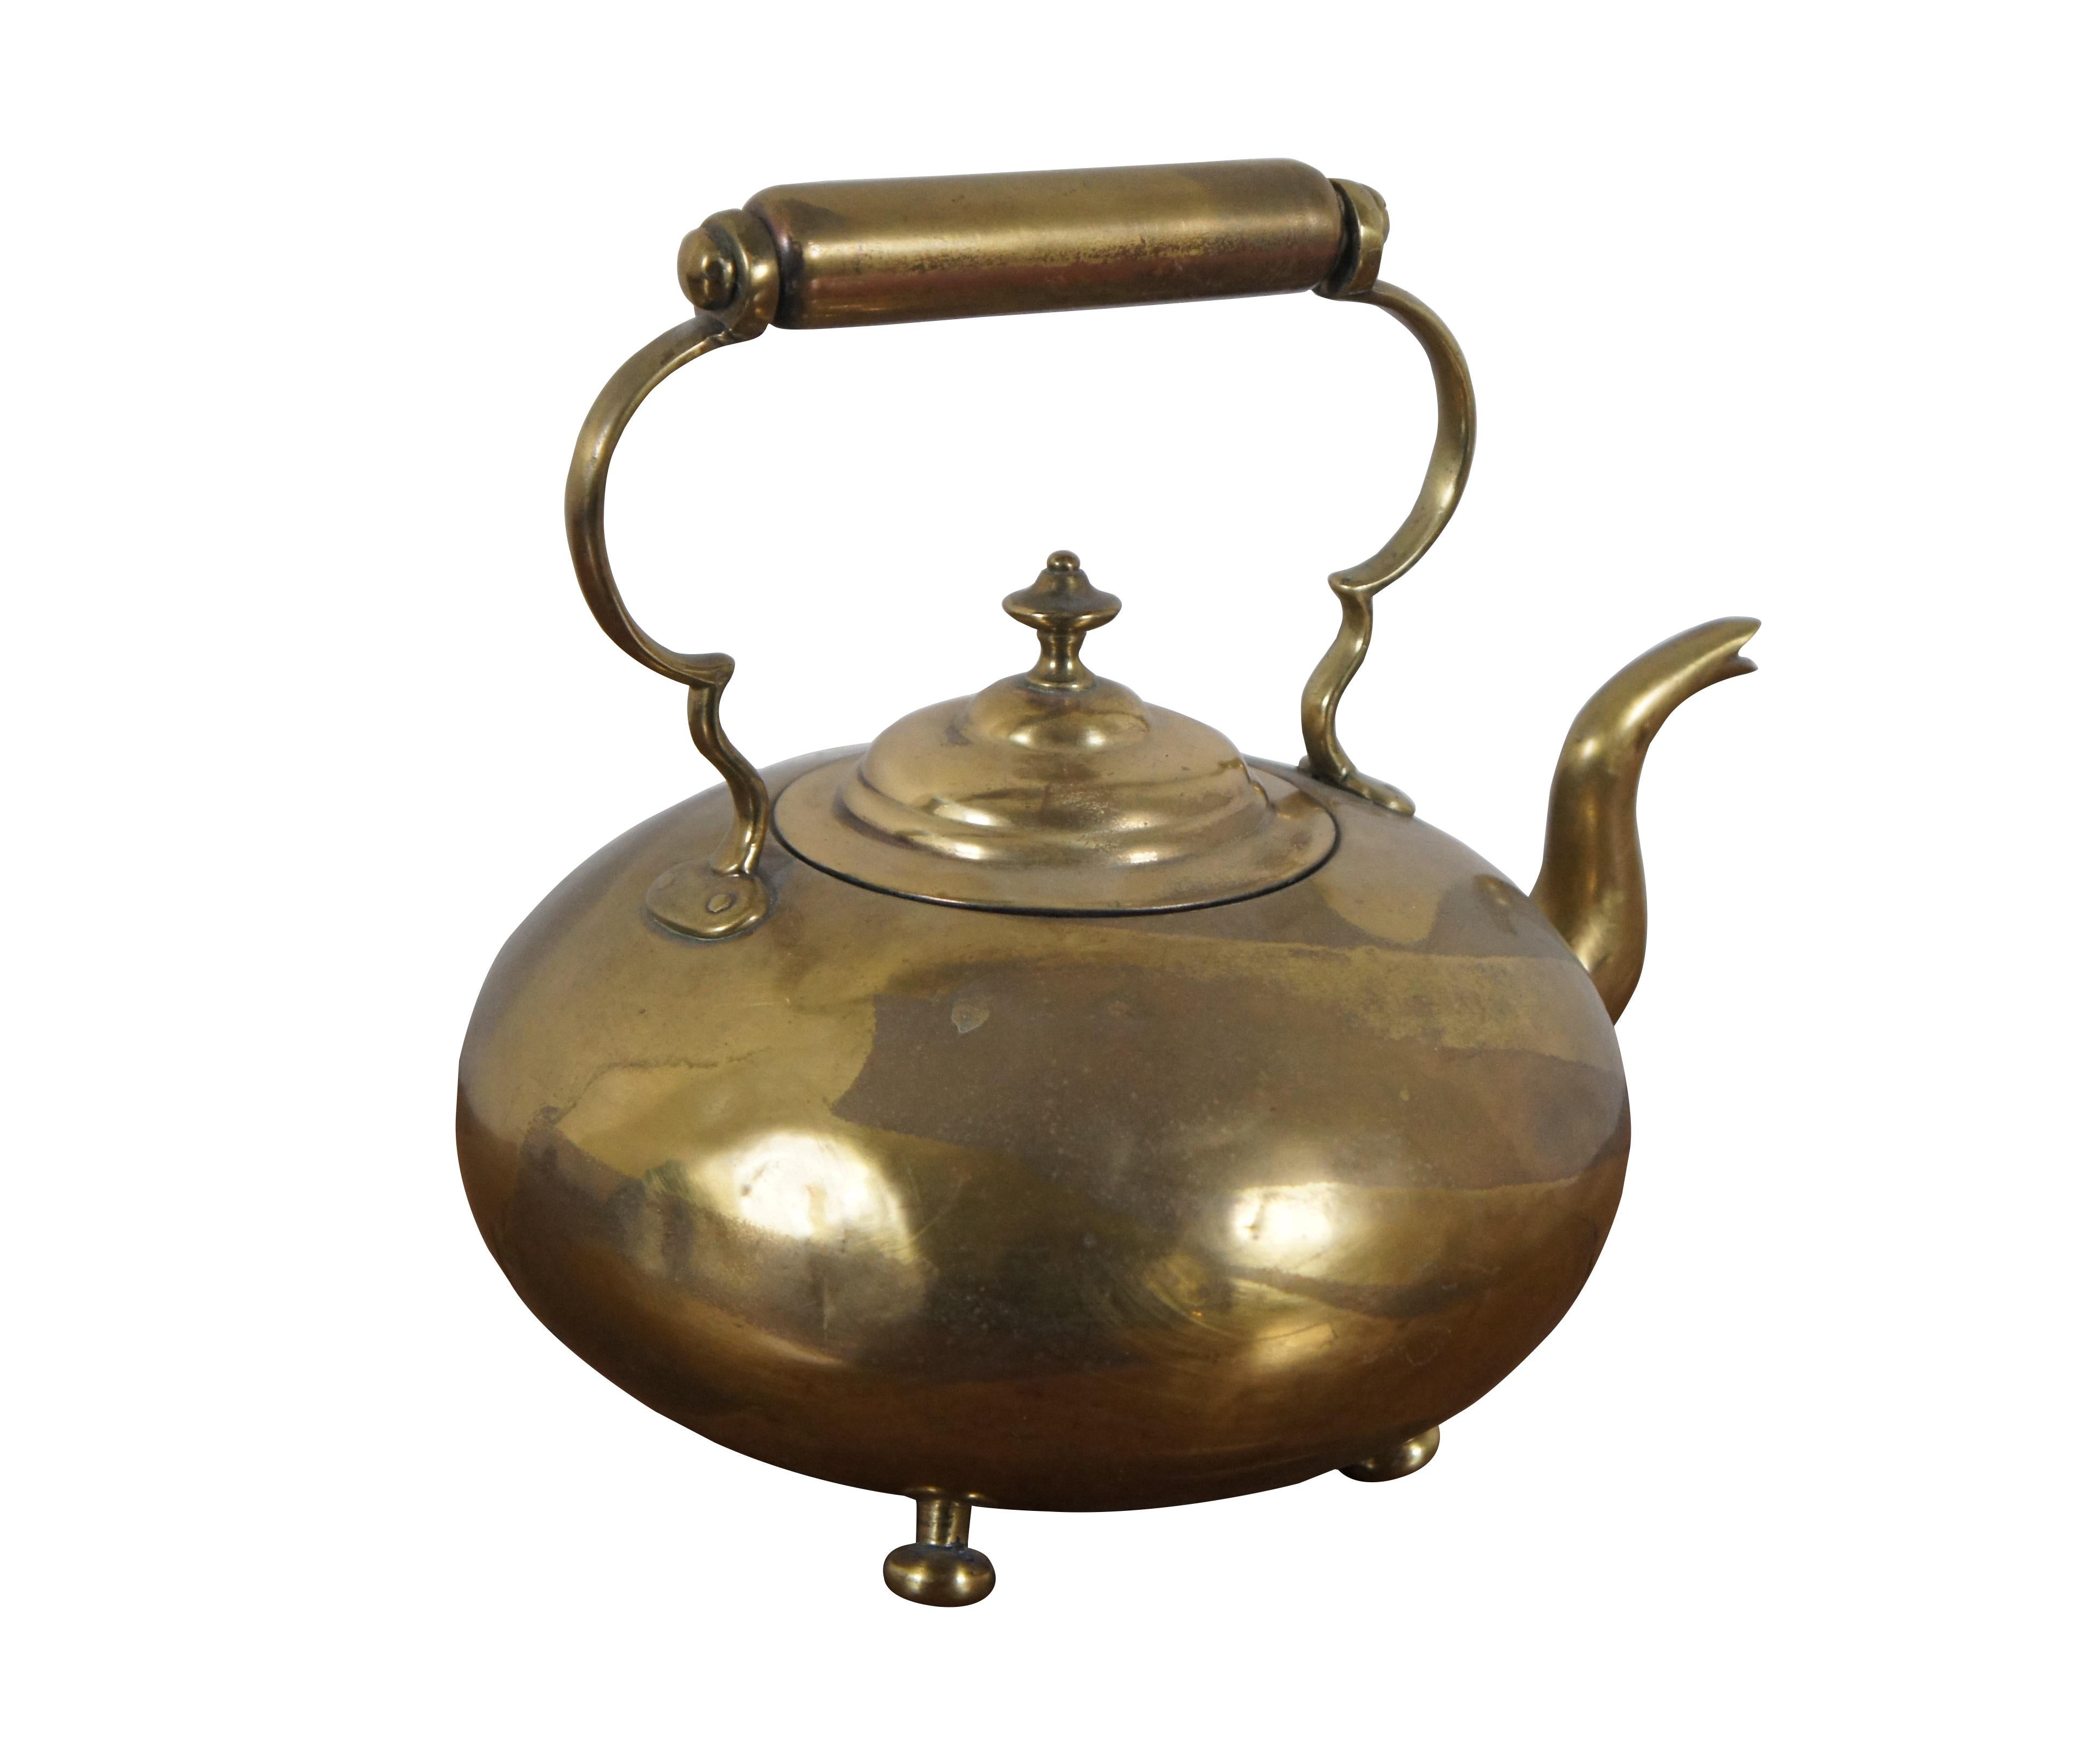 Antique Victorian Brass Hot Toddy Footed Goose Neck Tea Coffee Pot Kettle In Good Condition For Sale In Dayton, OH